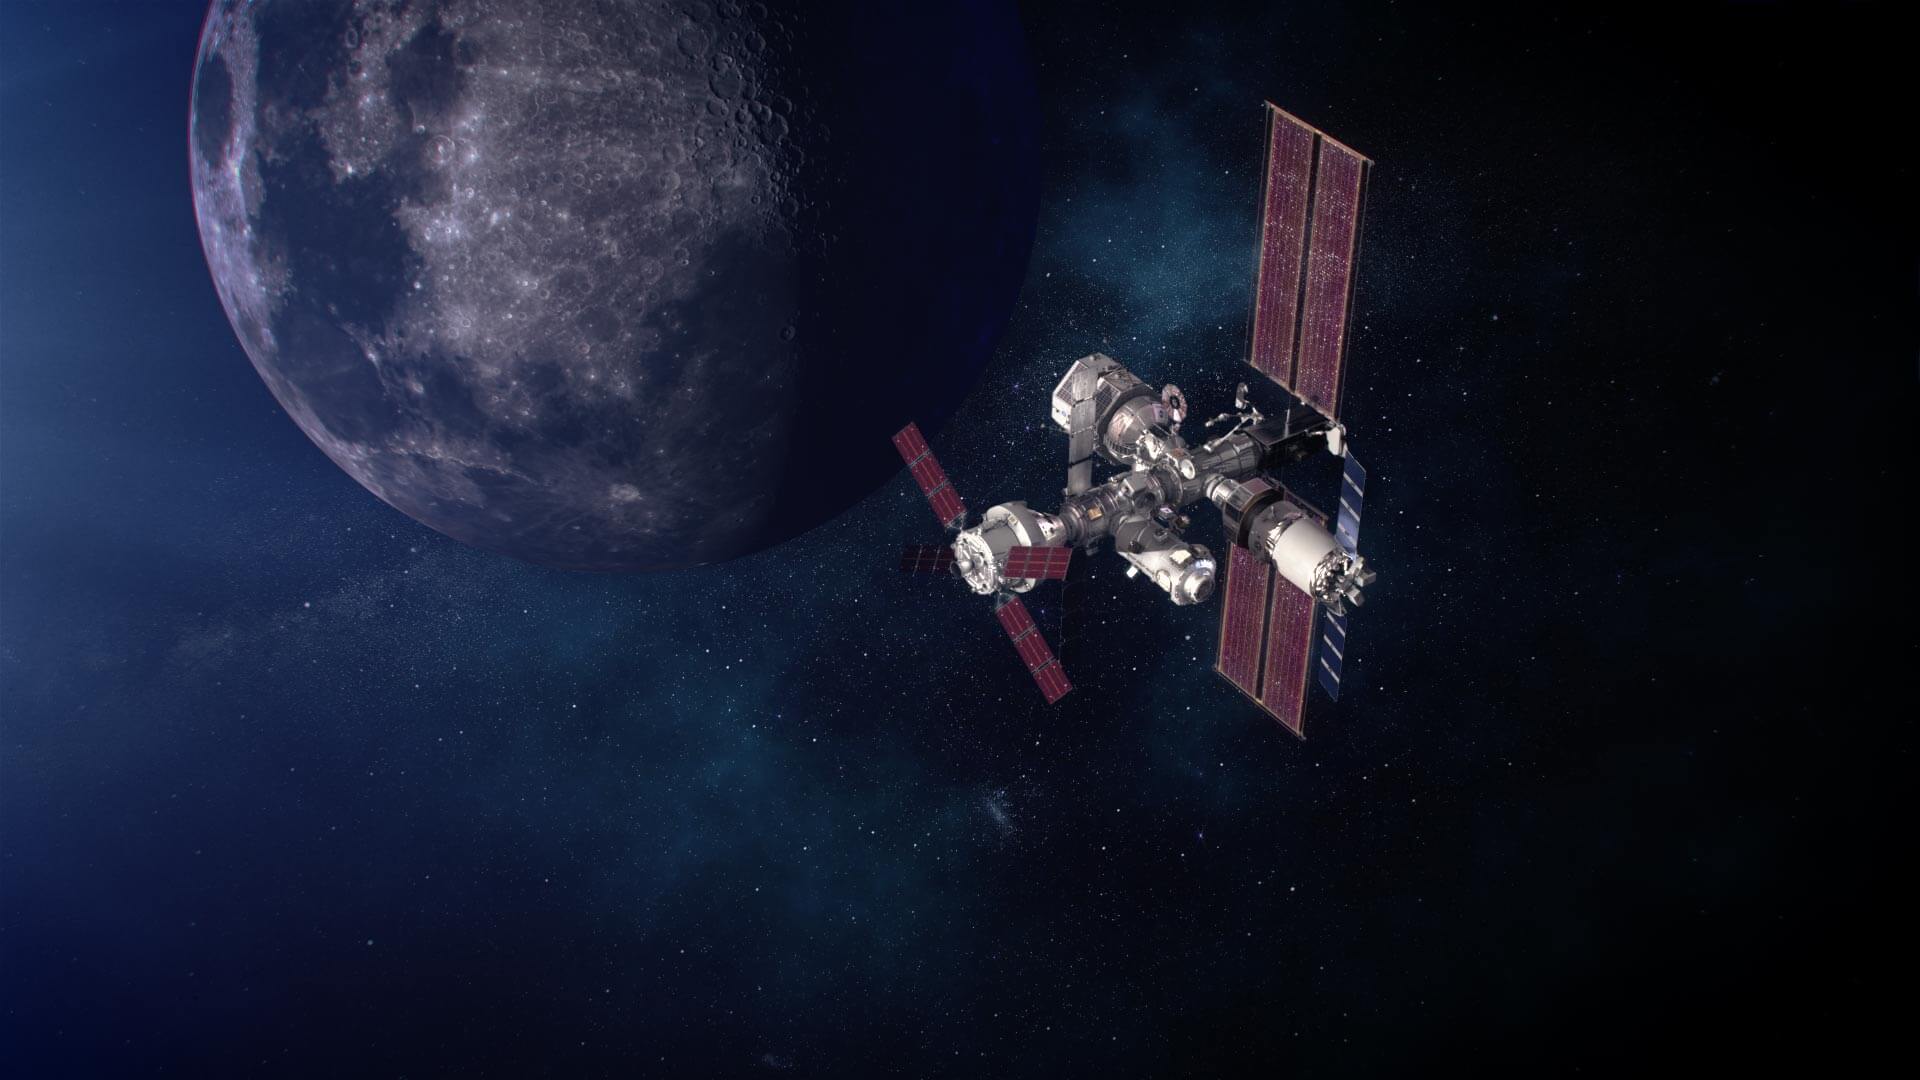 Artist's impression of the Moon Gate, a habitat, refueling and research center for astronauts exploring the Moon as part of the Artemis program. Credit: NASA/Alberto Bertolin